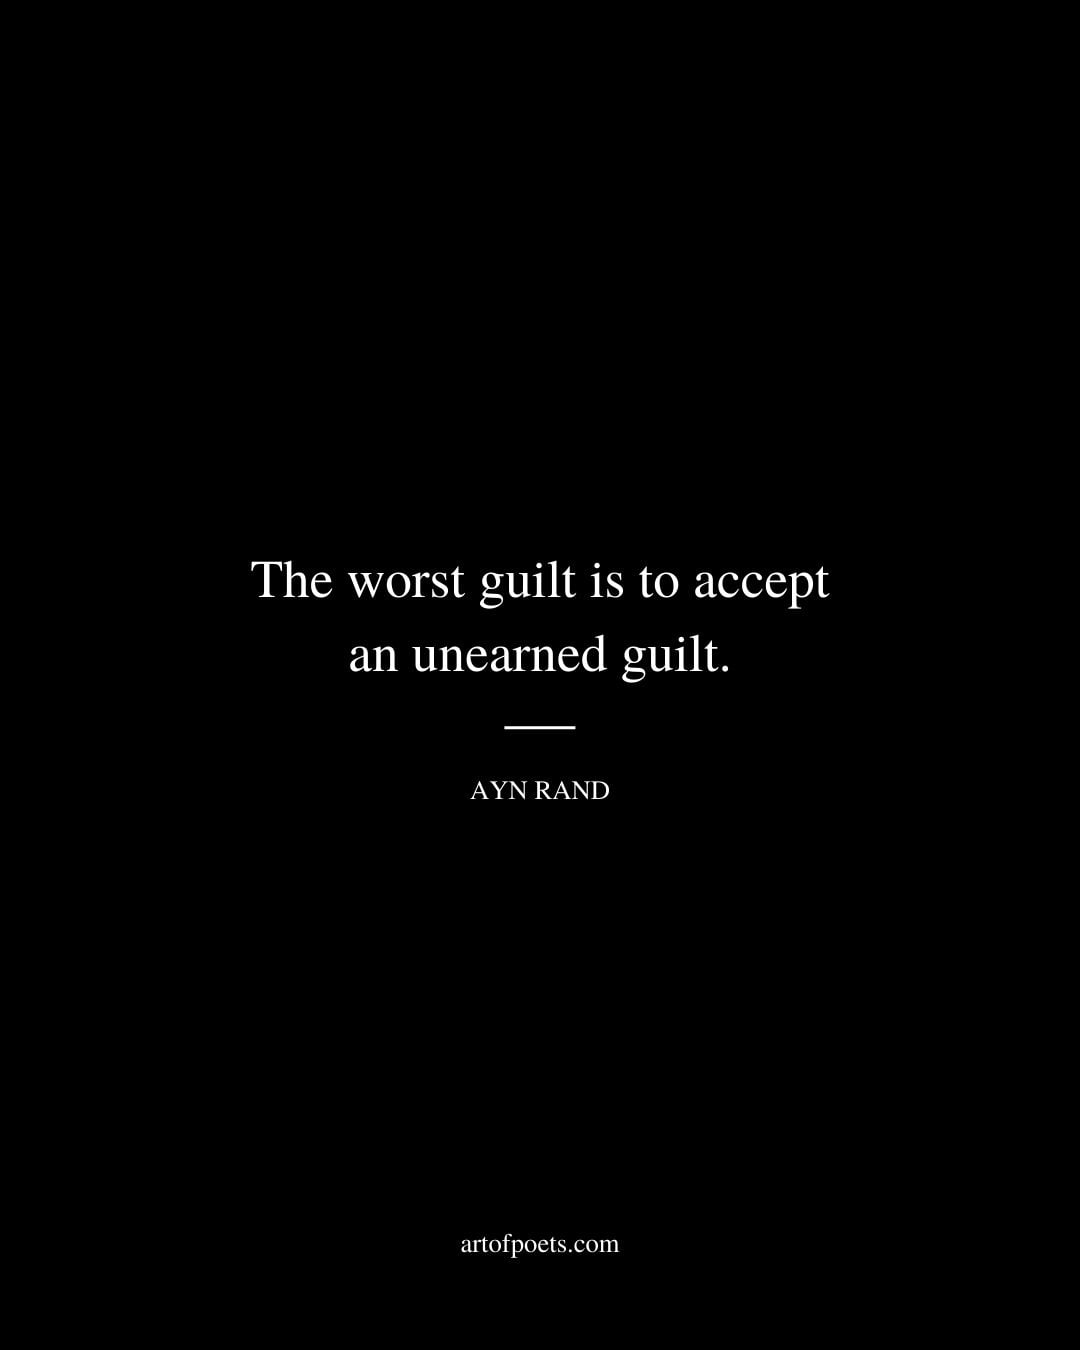 The worst guilt is to accept an unearned guilt 1